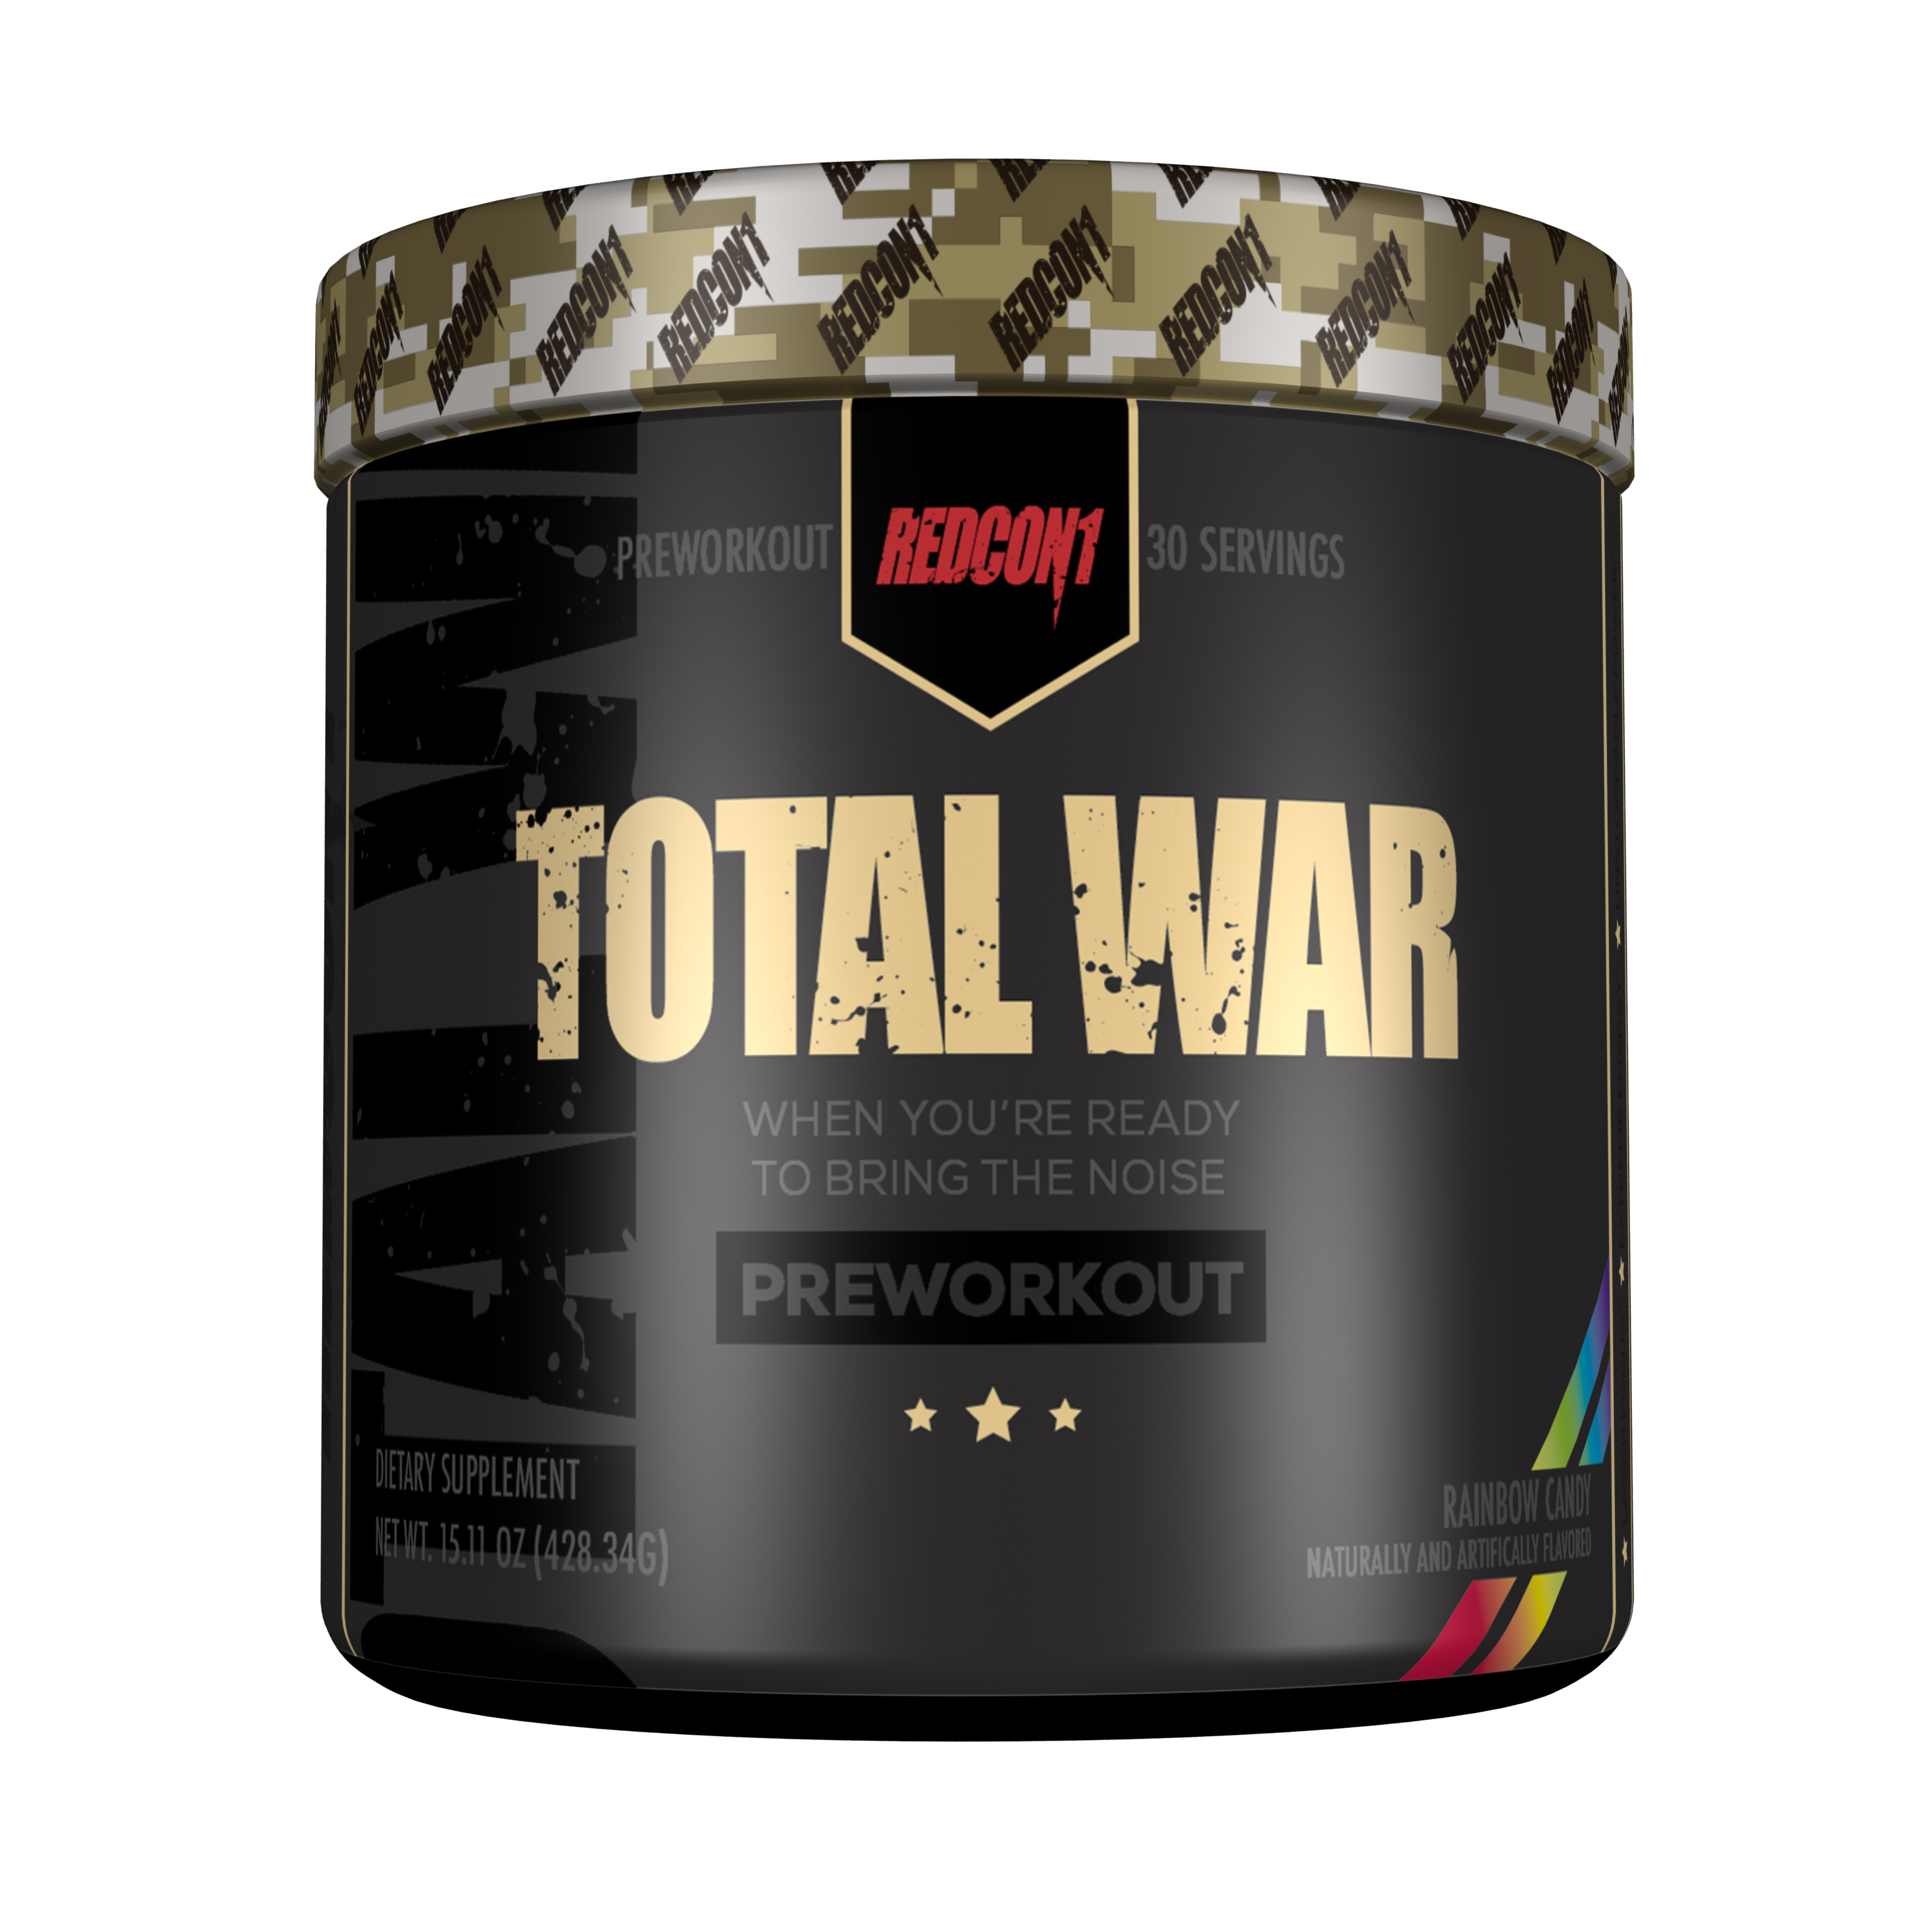 30 Minute War Pre Workout for Build Muscle